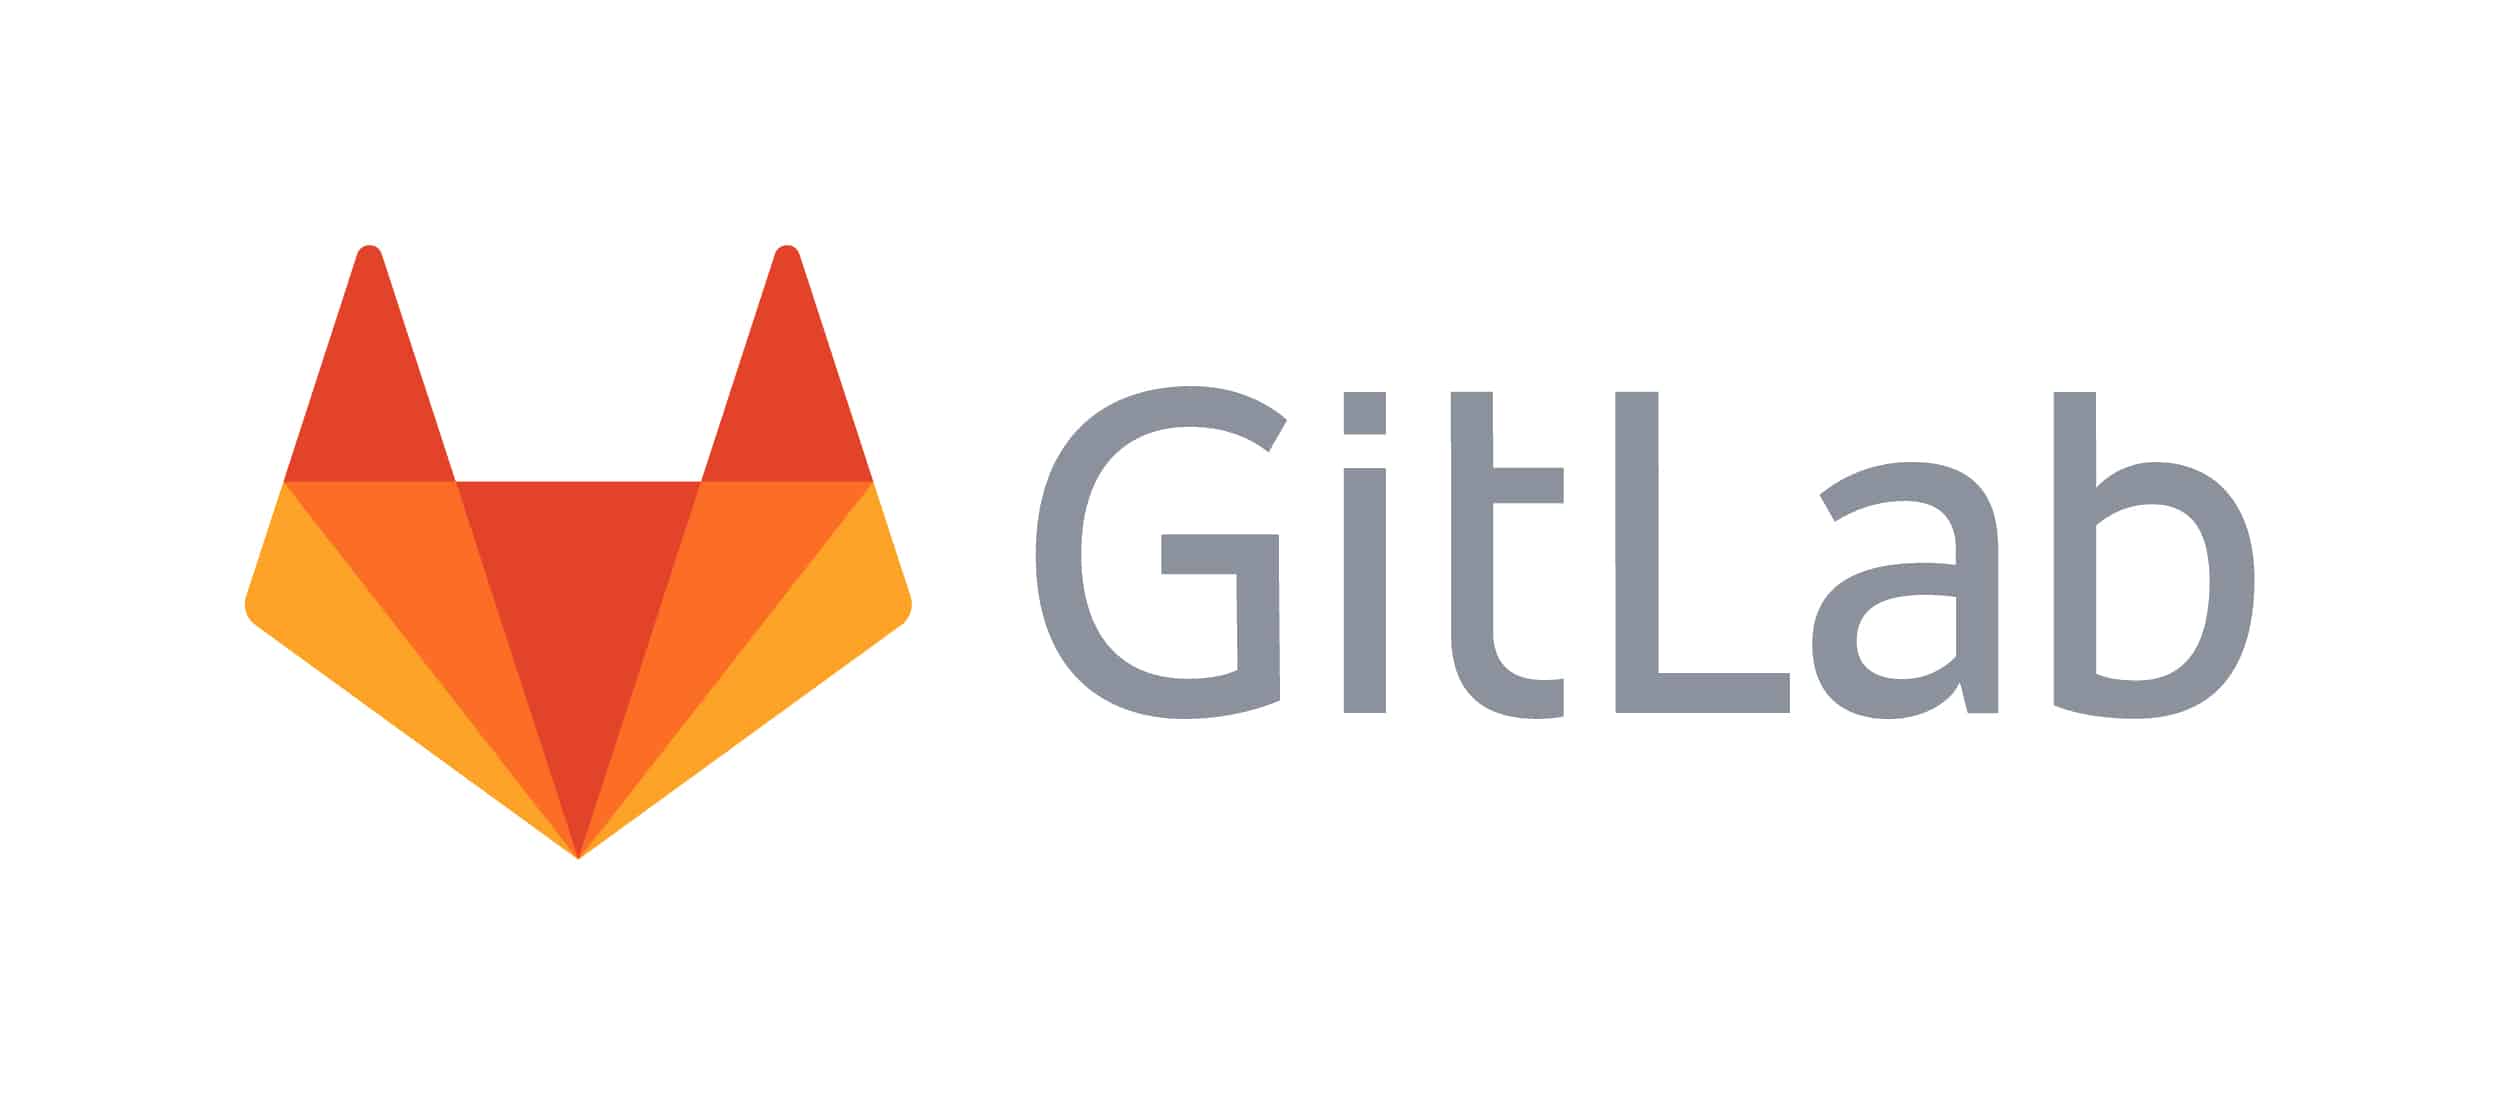 security vulnerabilities detected in gitlab that could lead to user data disclosure